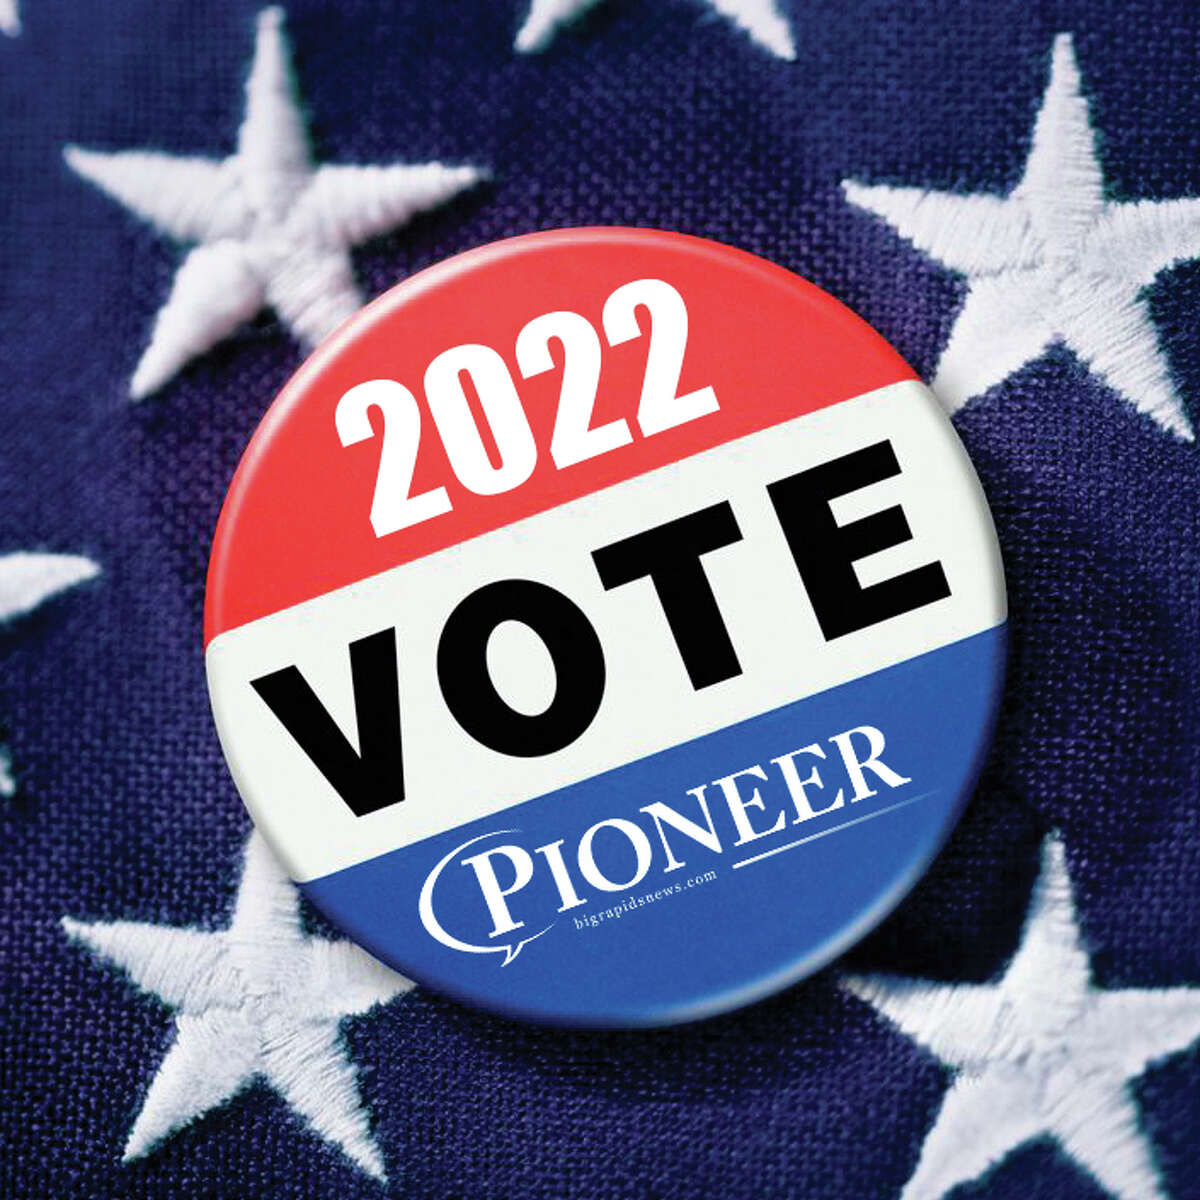 Voters in Mecosta, Osceola and Lake counties will have the opportunity to make their voices heard in several elections in 2022.